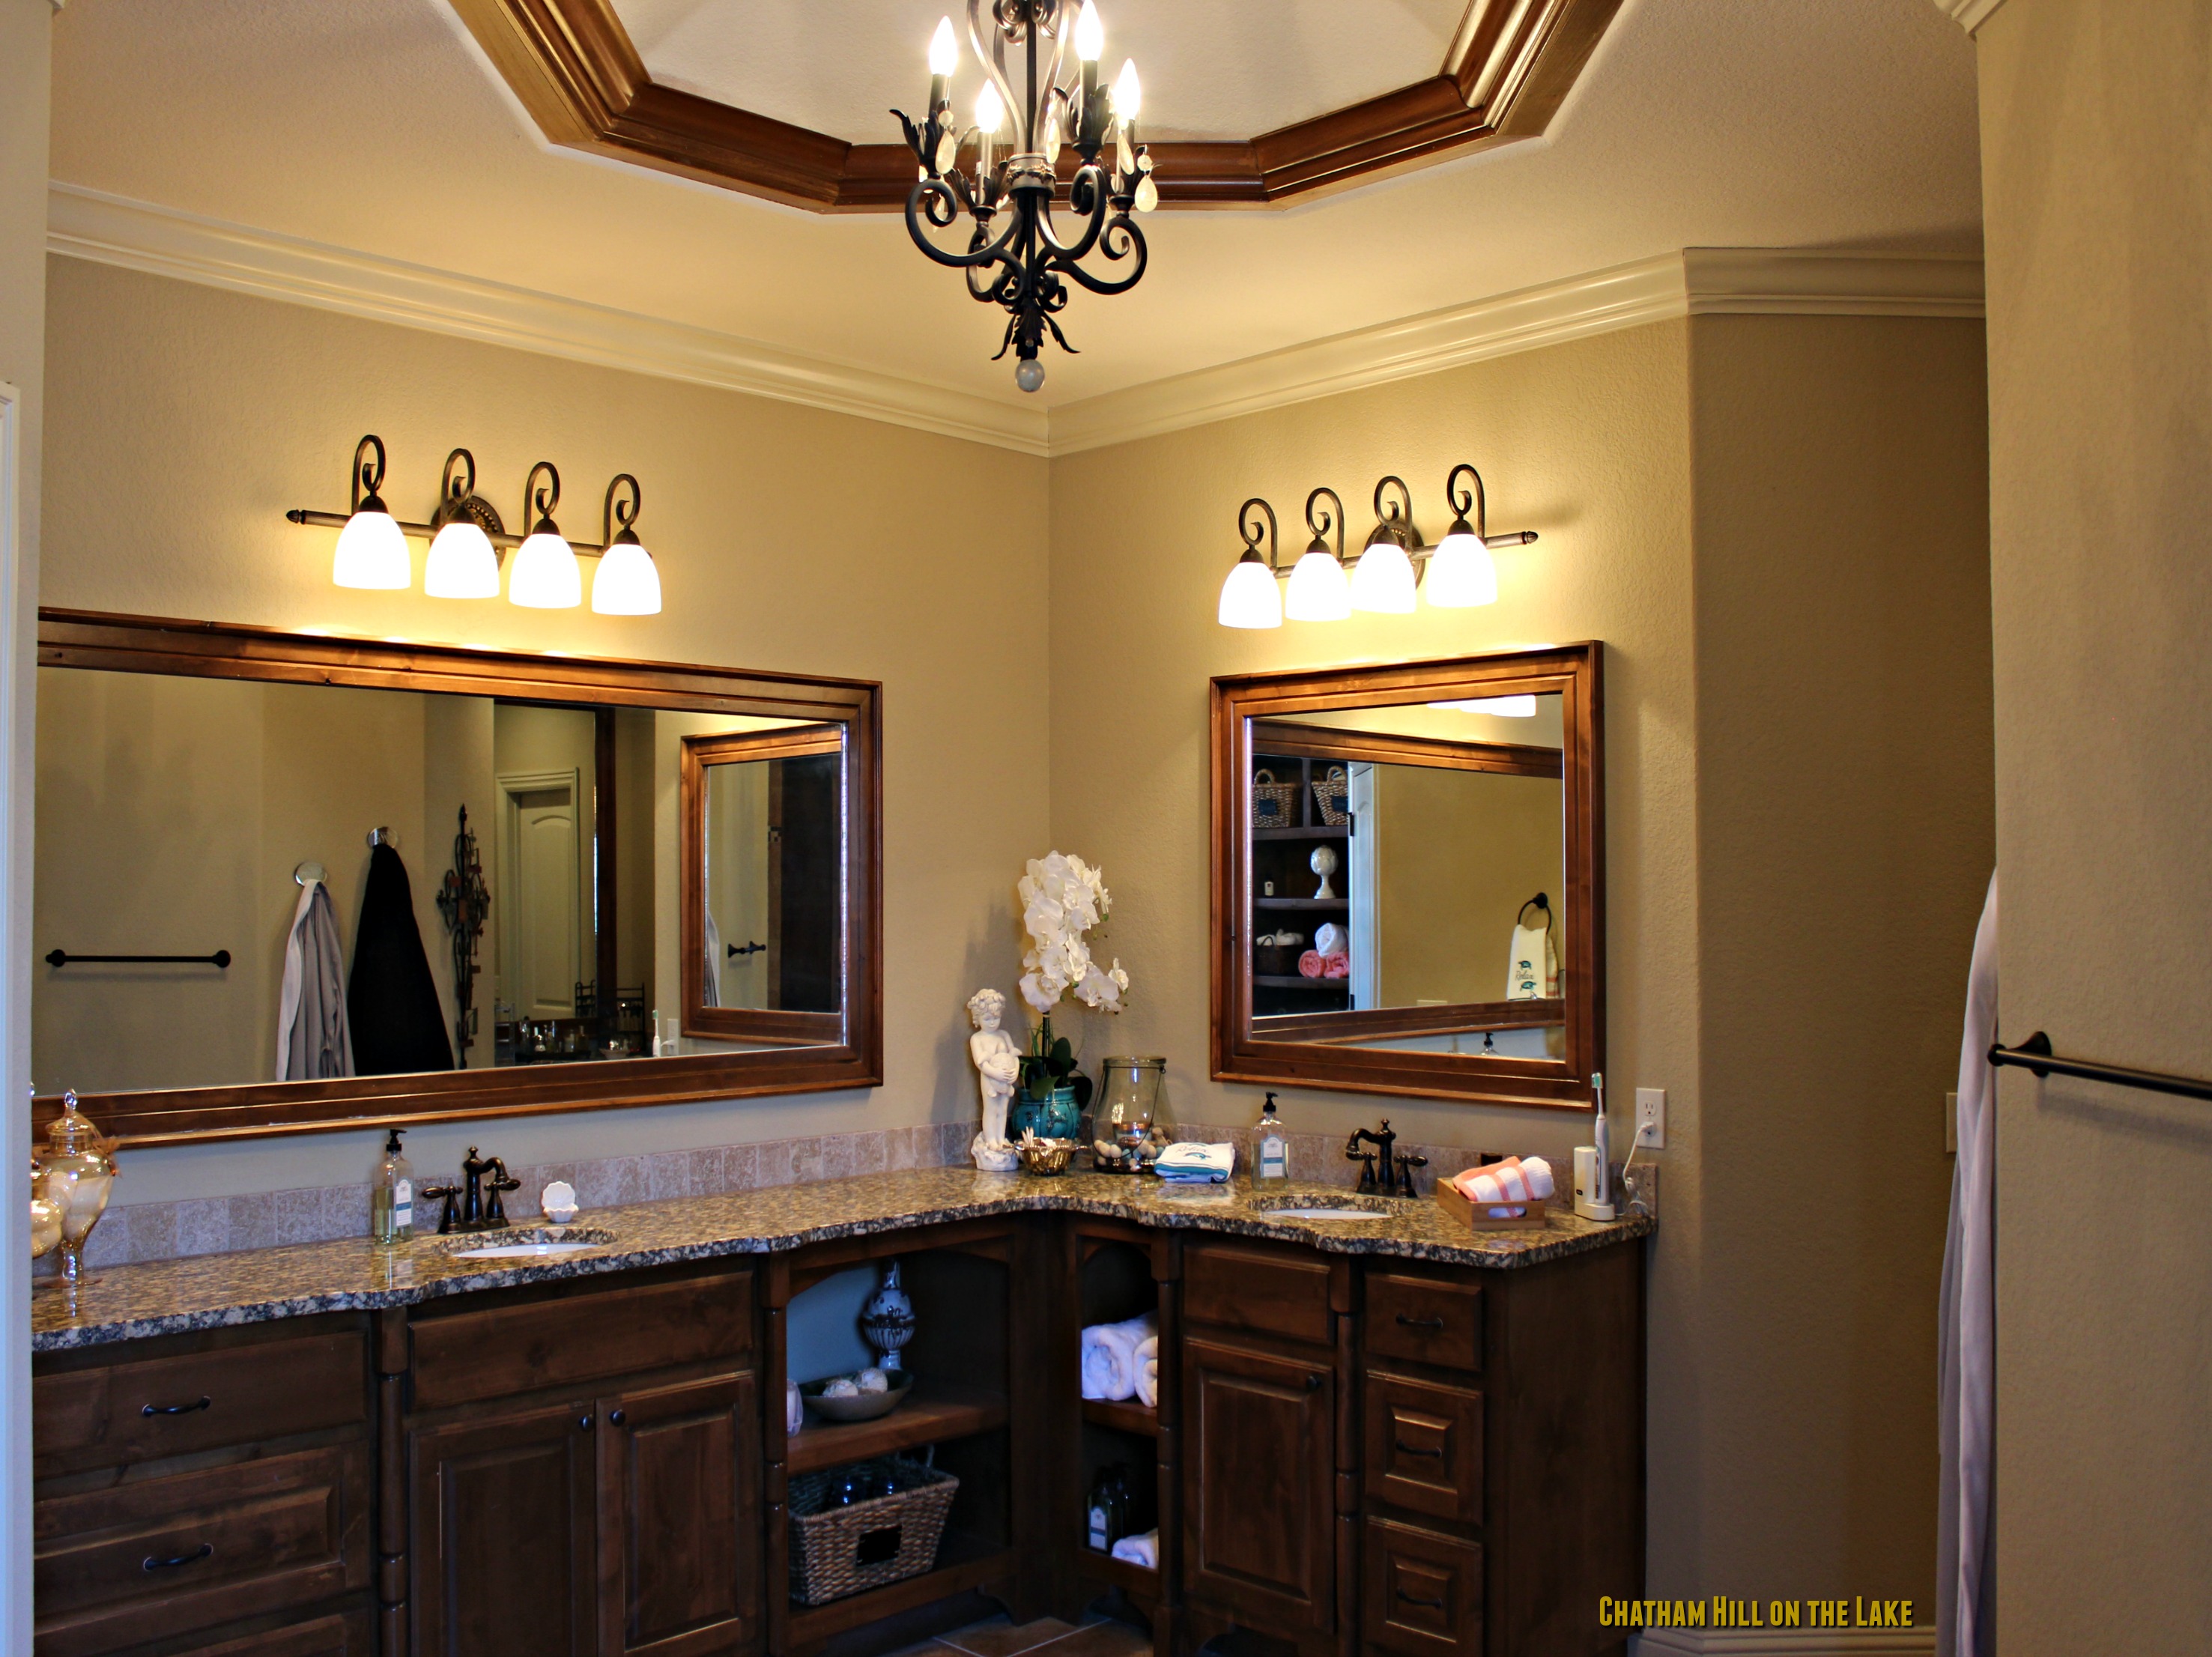 Hers and His Bathroom Vanity at www.chathamhillonthelakes.com